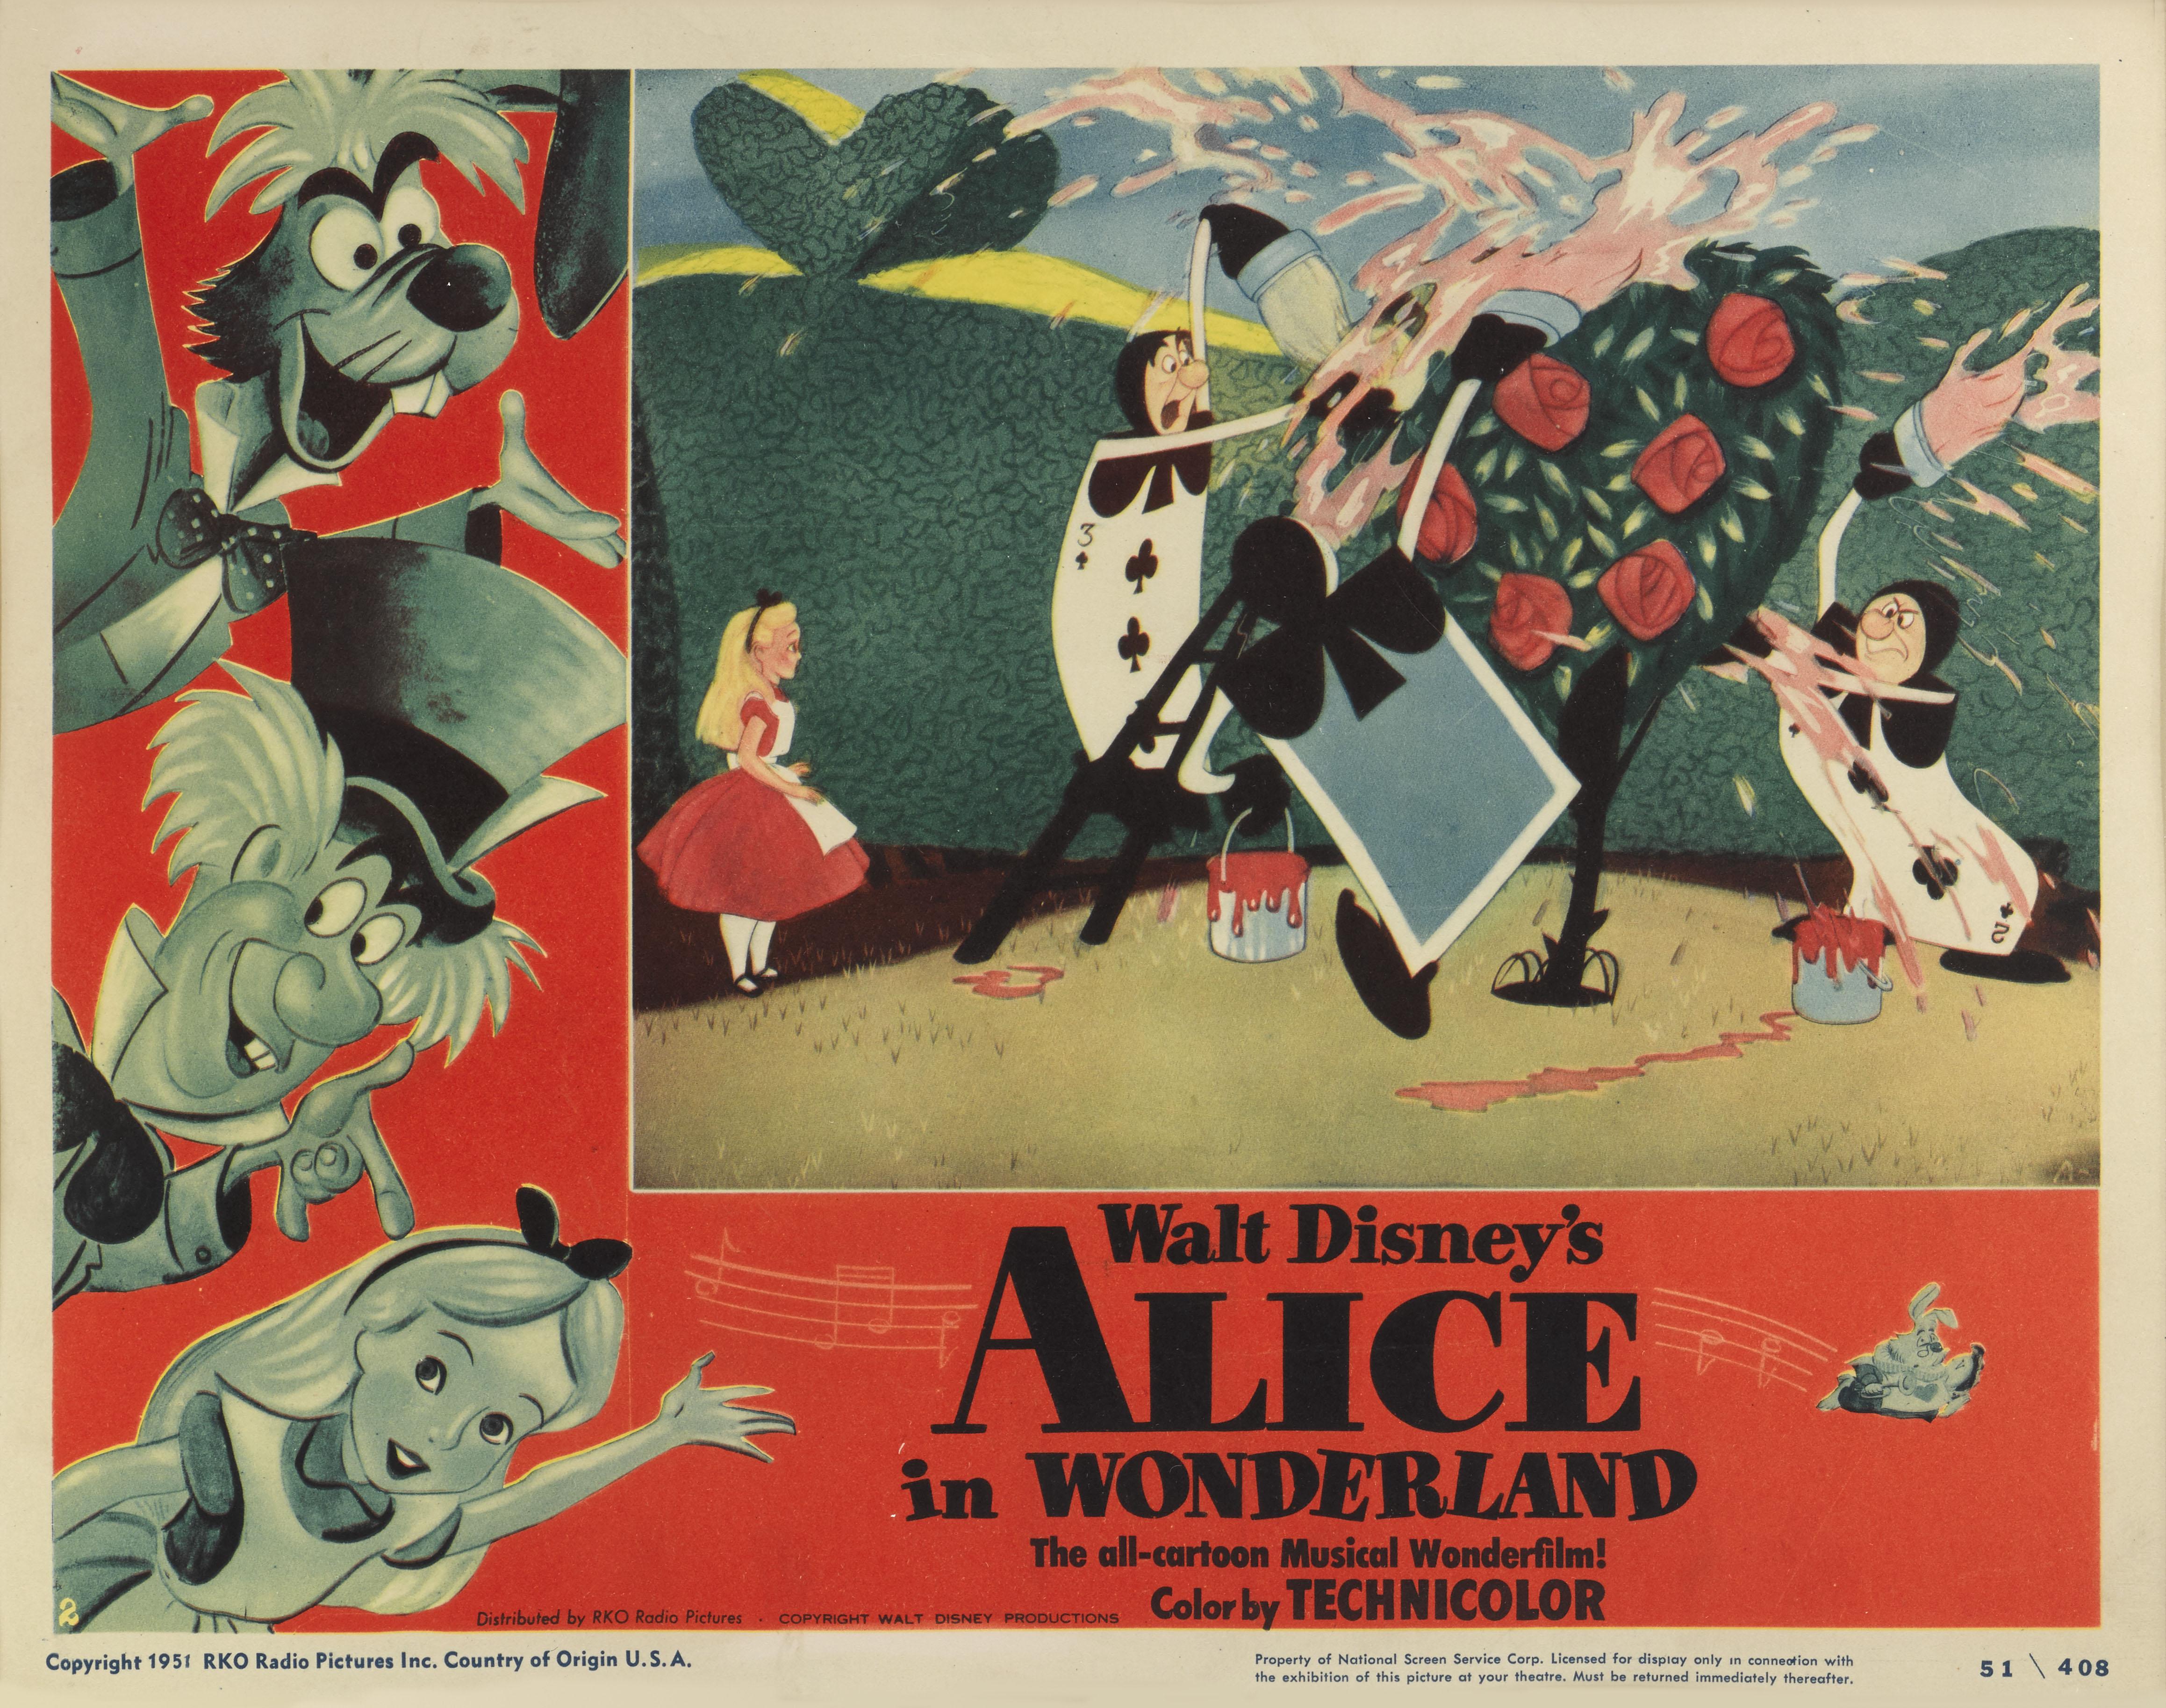 Original US framed lobby card from 1951.
Alice in Wonderland was released in 1951 by Walt Disney, and is based on the Alice books by Lewis Carroll. It was the thirteenth animated film that Disney made. Walt Disney had attempted to make the film